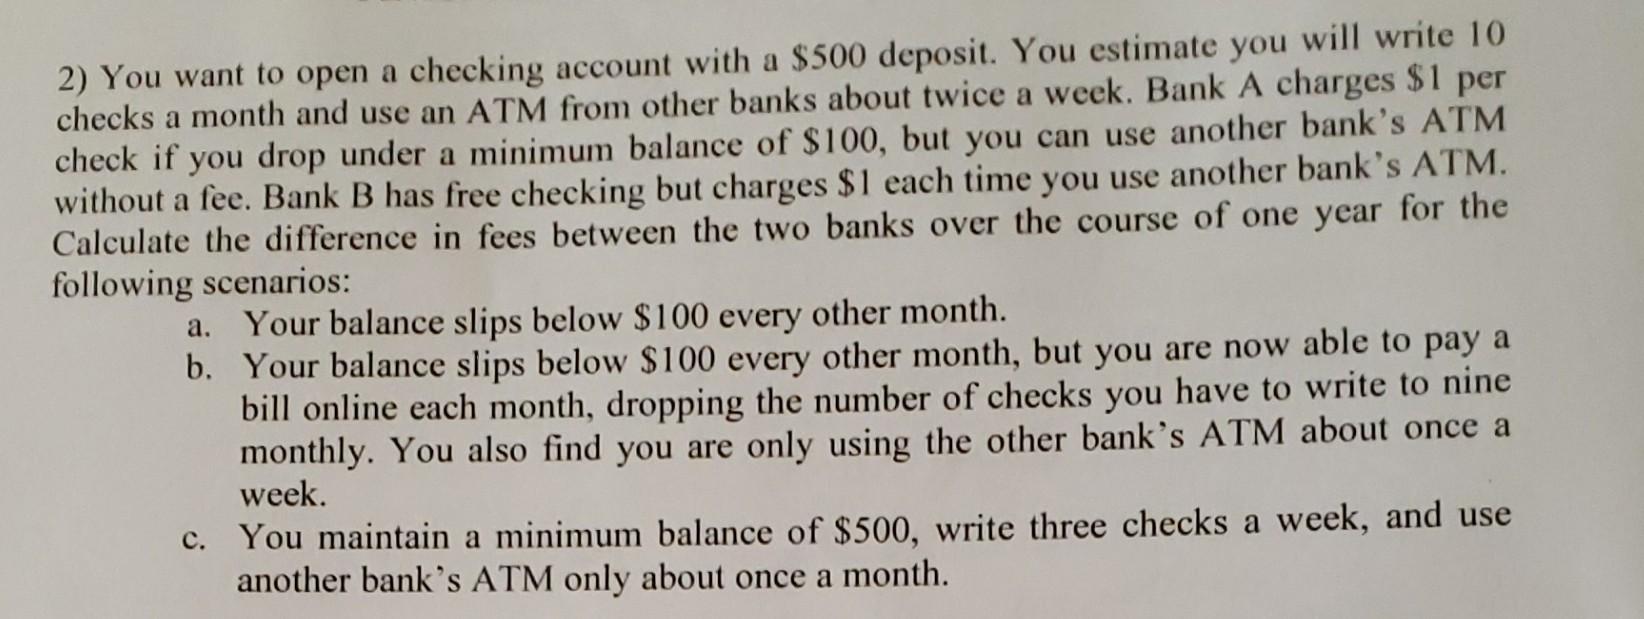 What Do You Need to Open A Bank/Checking Account?